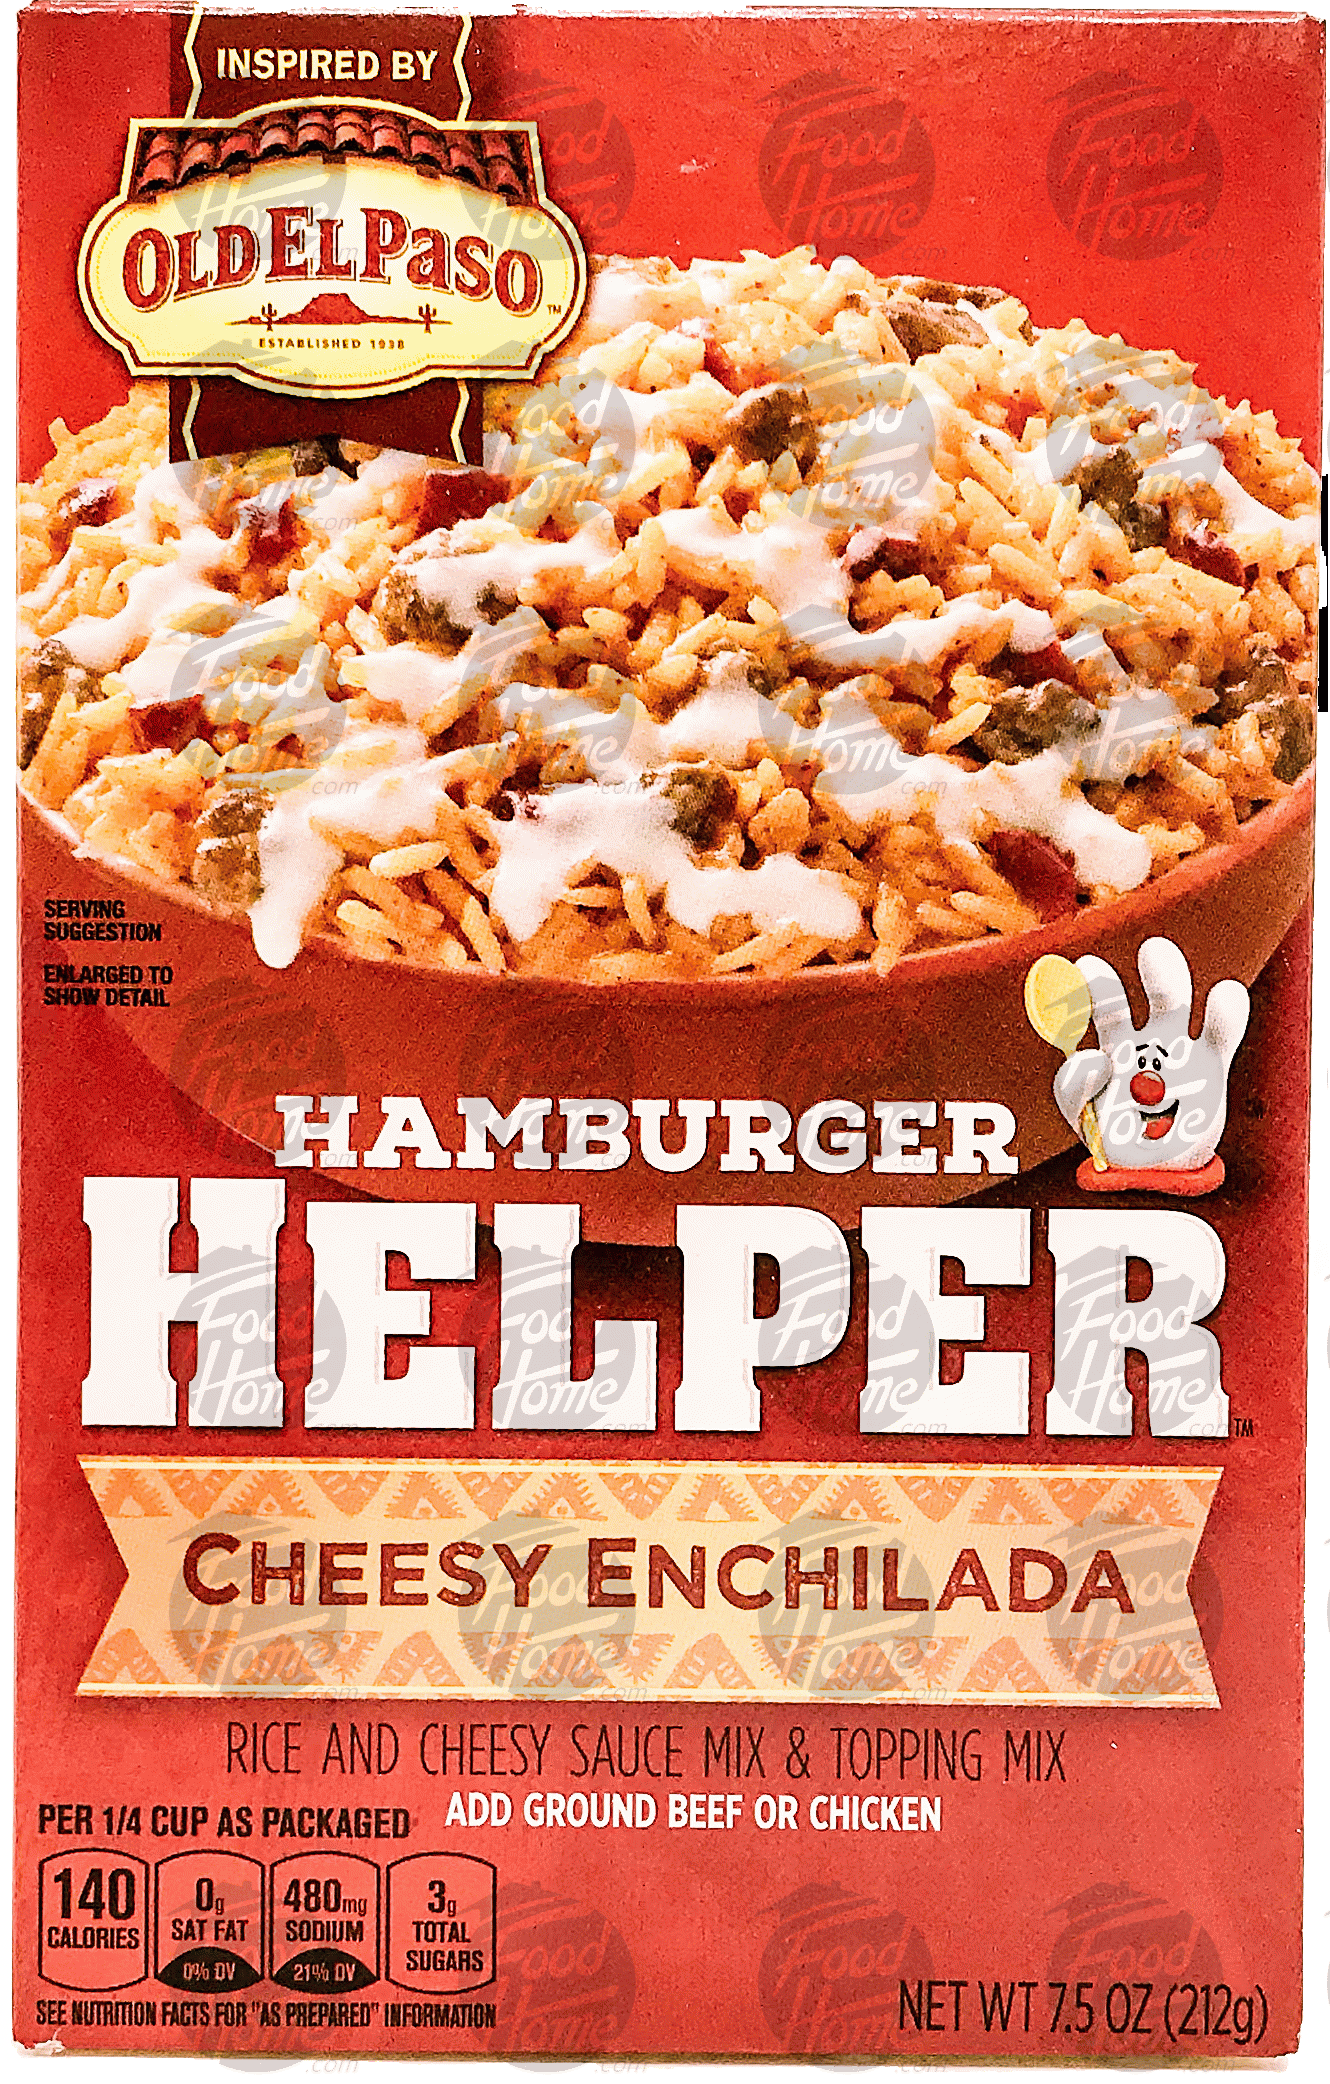 Betty Crocker hamburger helper mexican cheesy enchilada: rice and naturally flavored cheesy sauce mix & topping mix Full-Size Picture